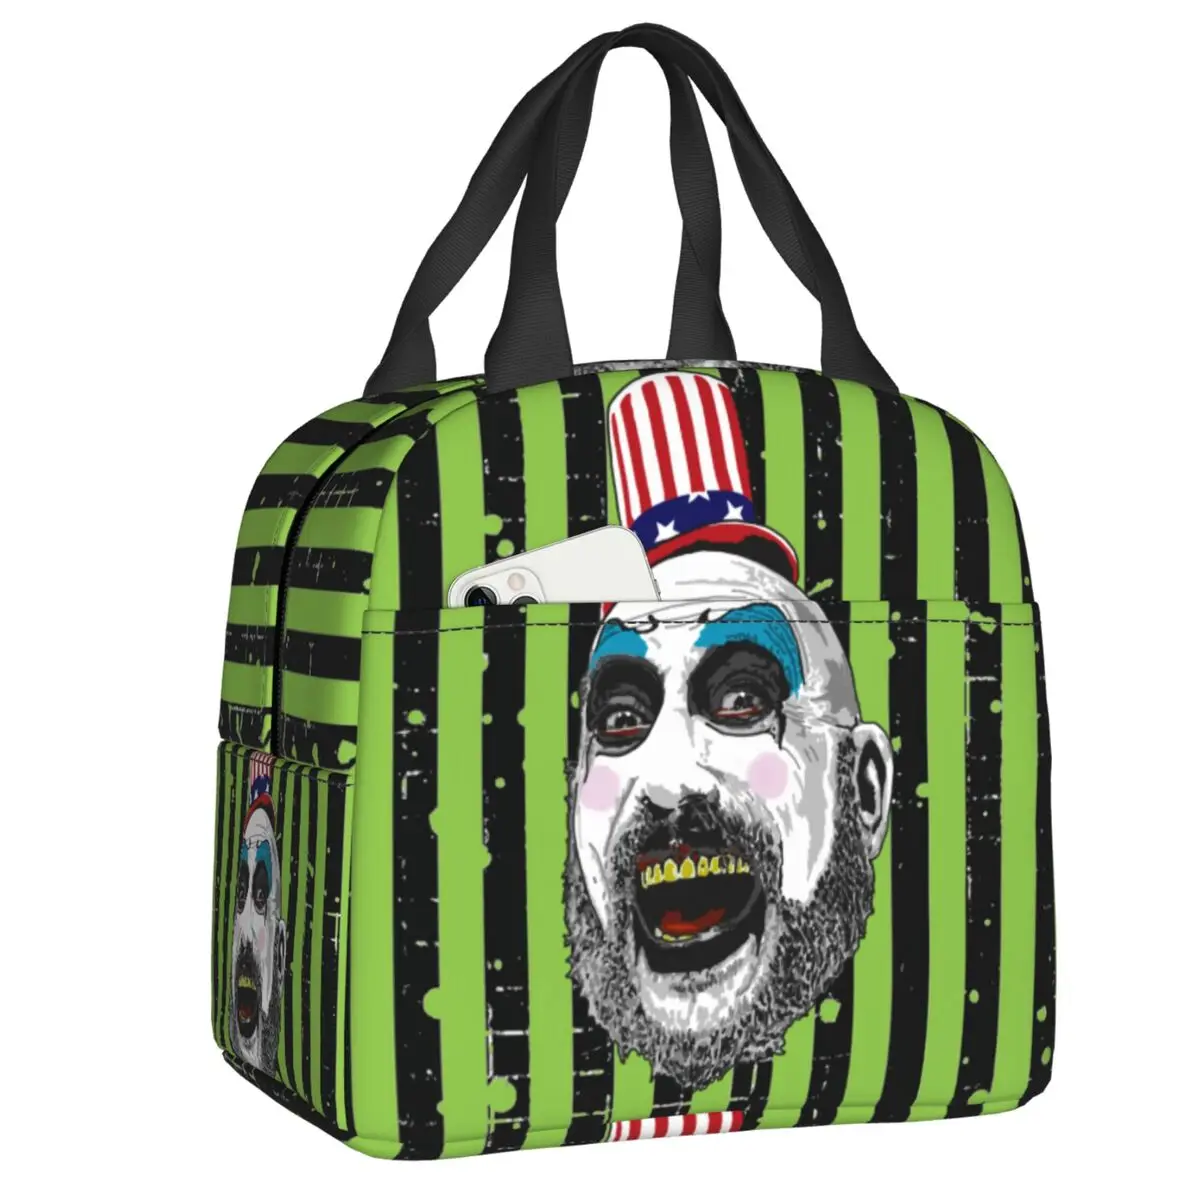 

Horror Movie Captain Spaulding Insulated Lunch Bag Leakproof Thermal Cooler Bento Box For Women Kids School Food Lunch Box